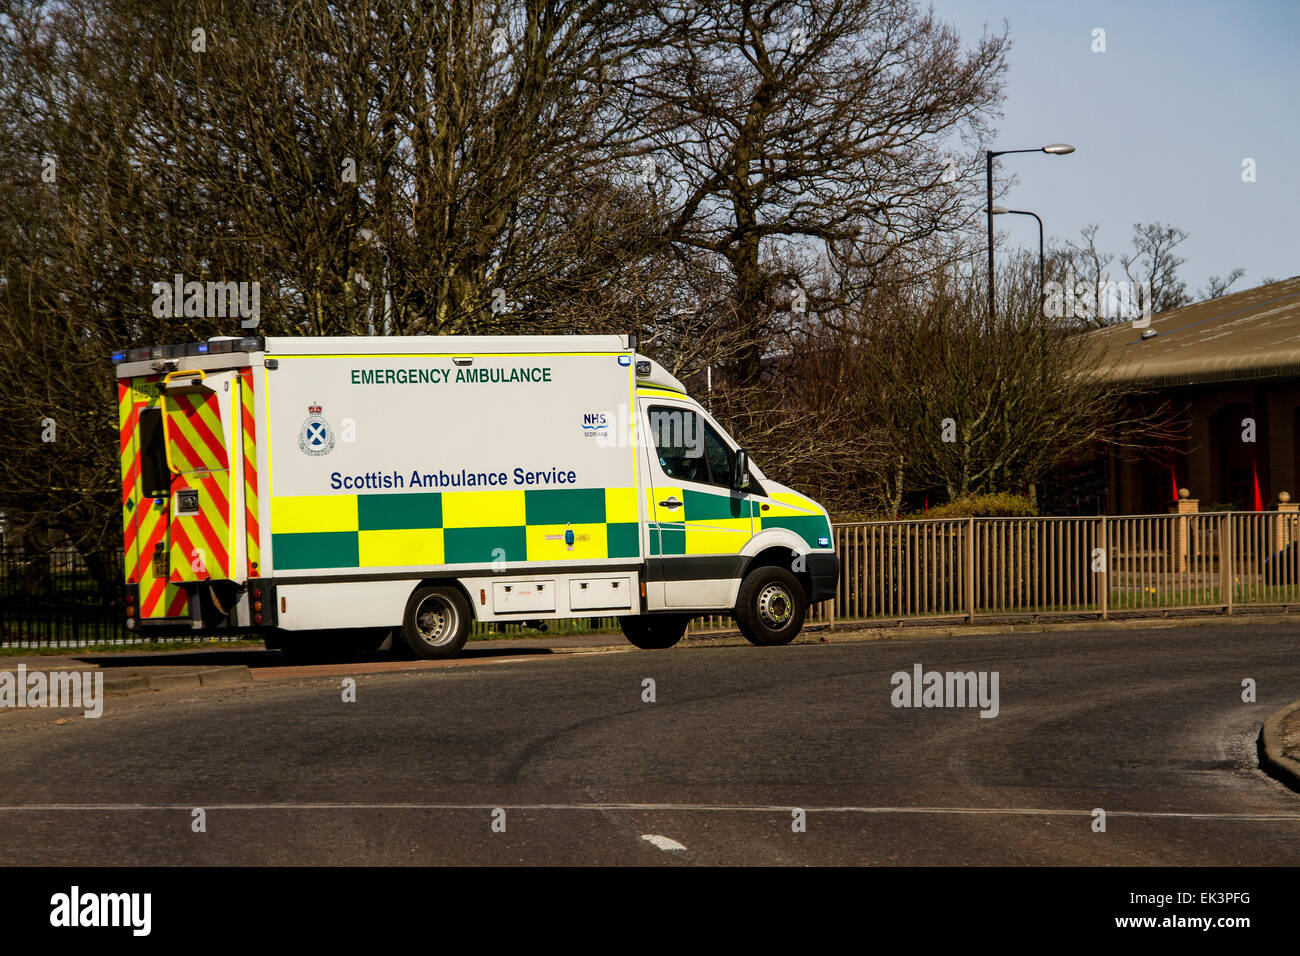 An Emergency Ambulance from the Scottish Ambulance Service responding to a 999 emergency call in Dundee, Scotland Stock Photo